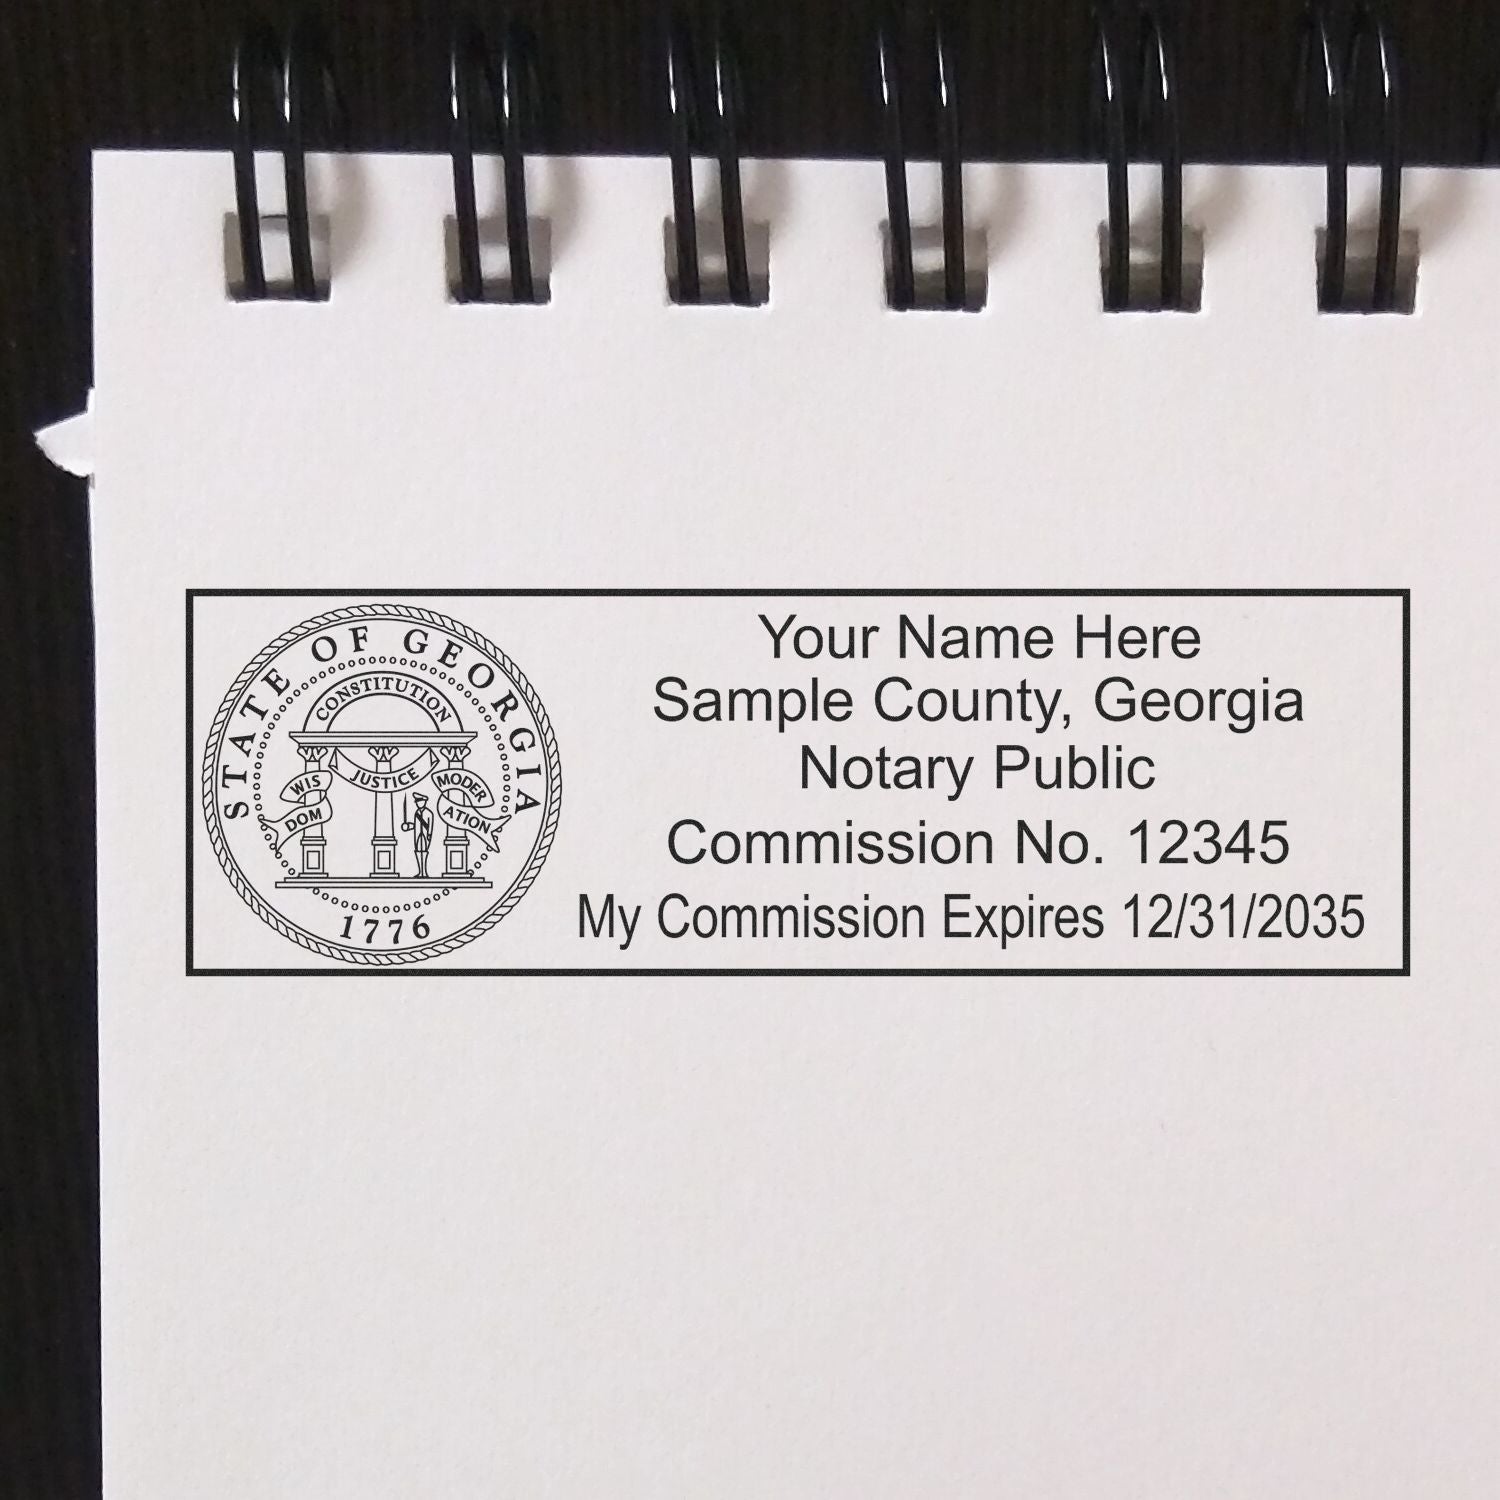 The main image for the Heavy-Duty Georgia Rectangular Notary Stamp depicting a sample of the imprint and electronic files